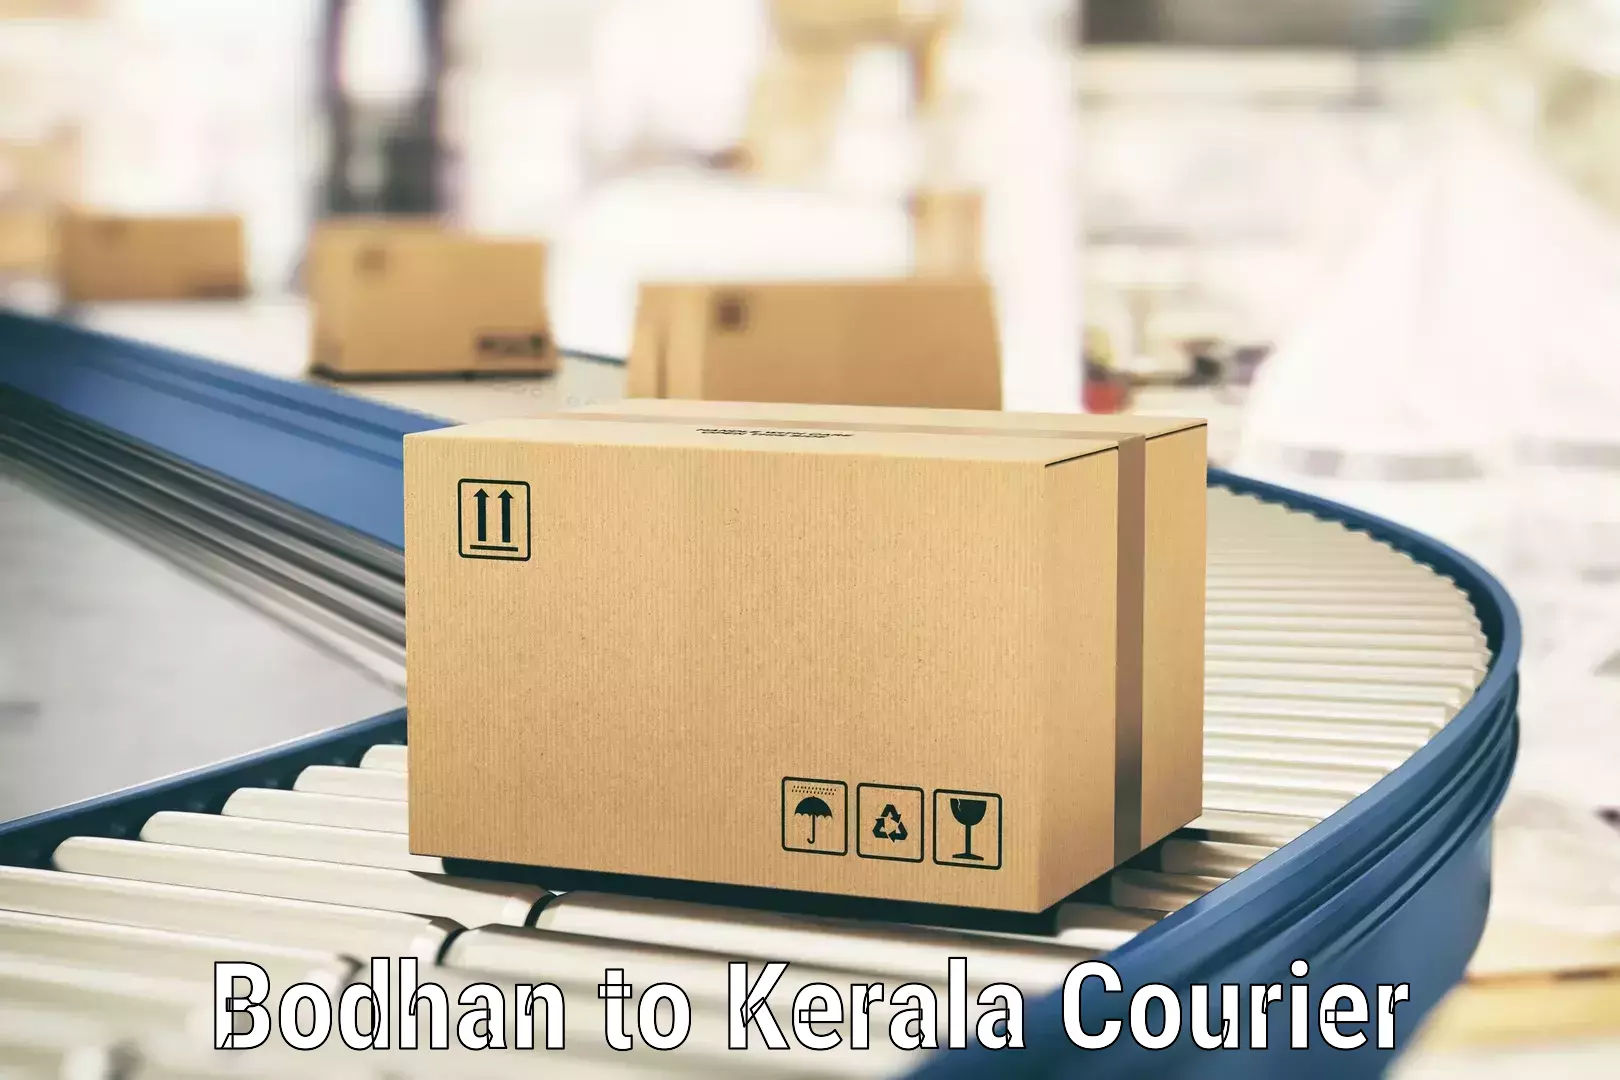 24-hour delivery options Bodhan to Kerala